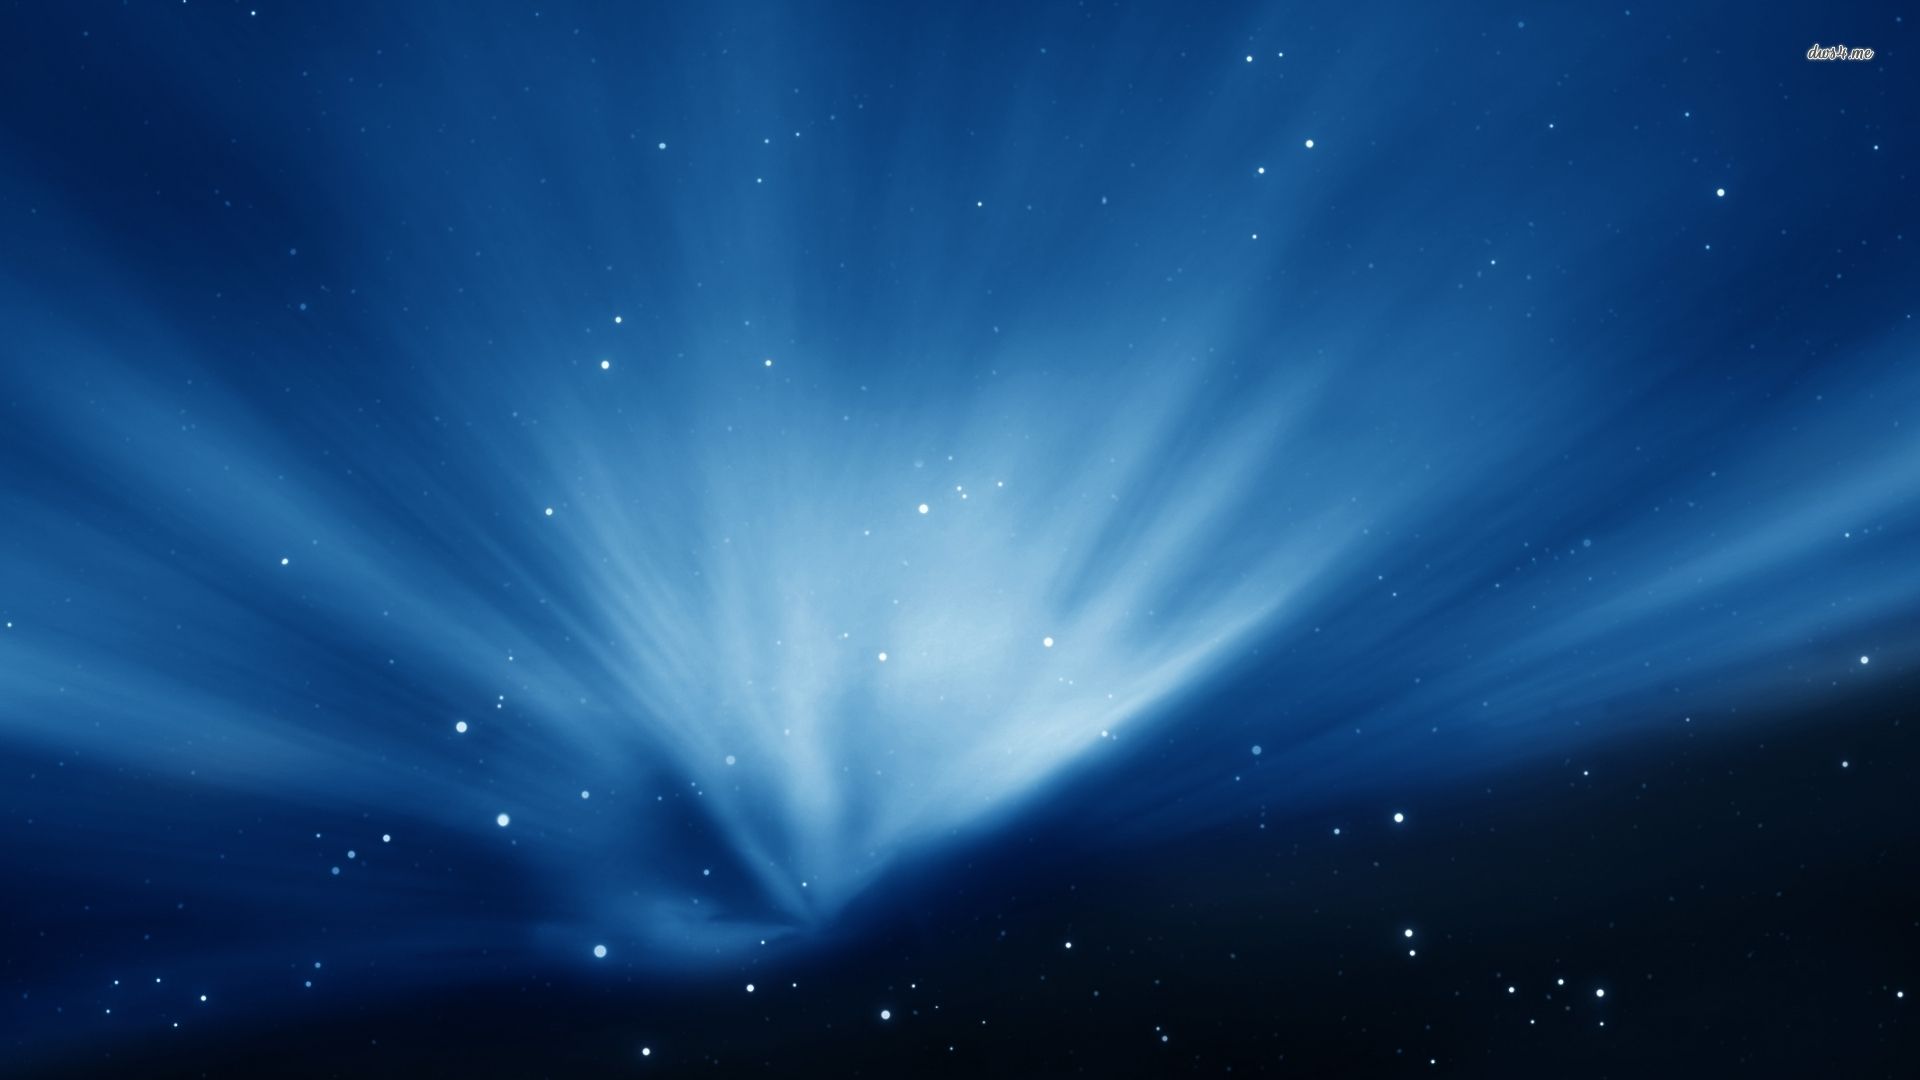 Blue light in space wallpaper - Abstract wallpapers